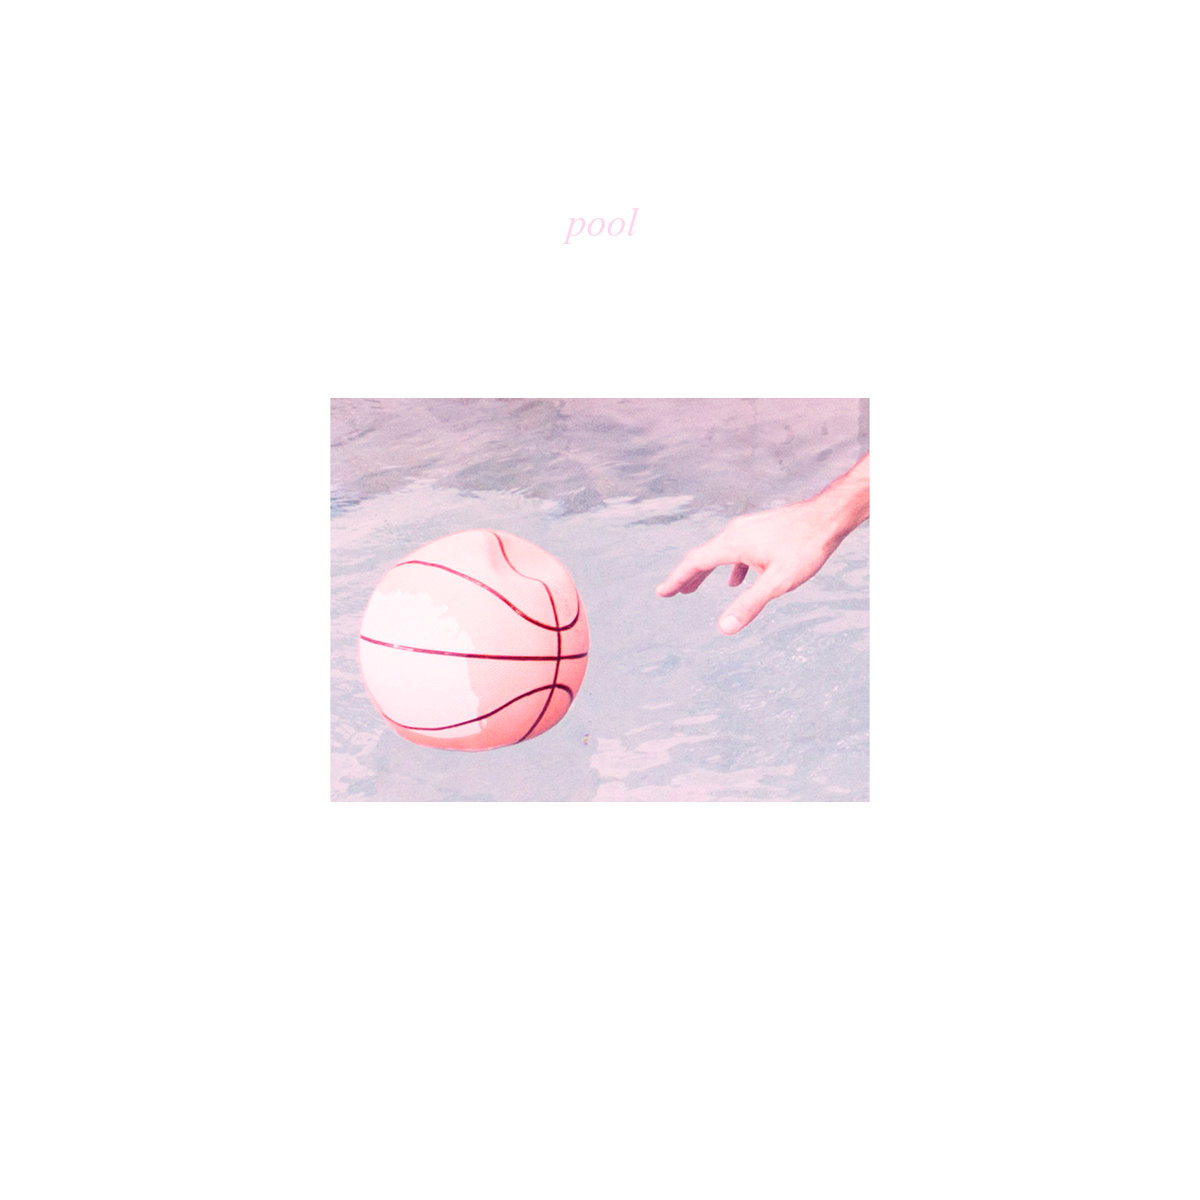 'Pool' by Porches, album review by Graham Caldwell. 'Pool' comes out on February 5th via Domino Records.